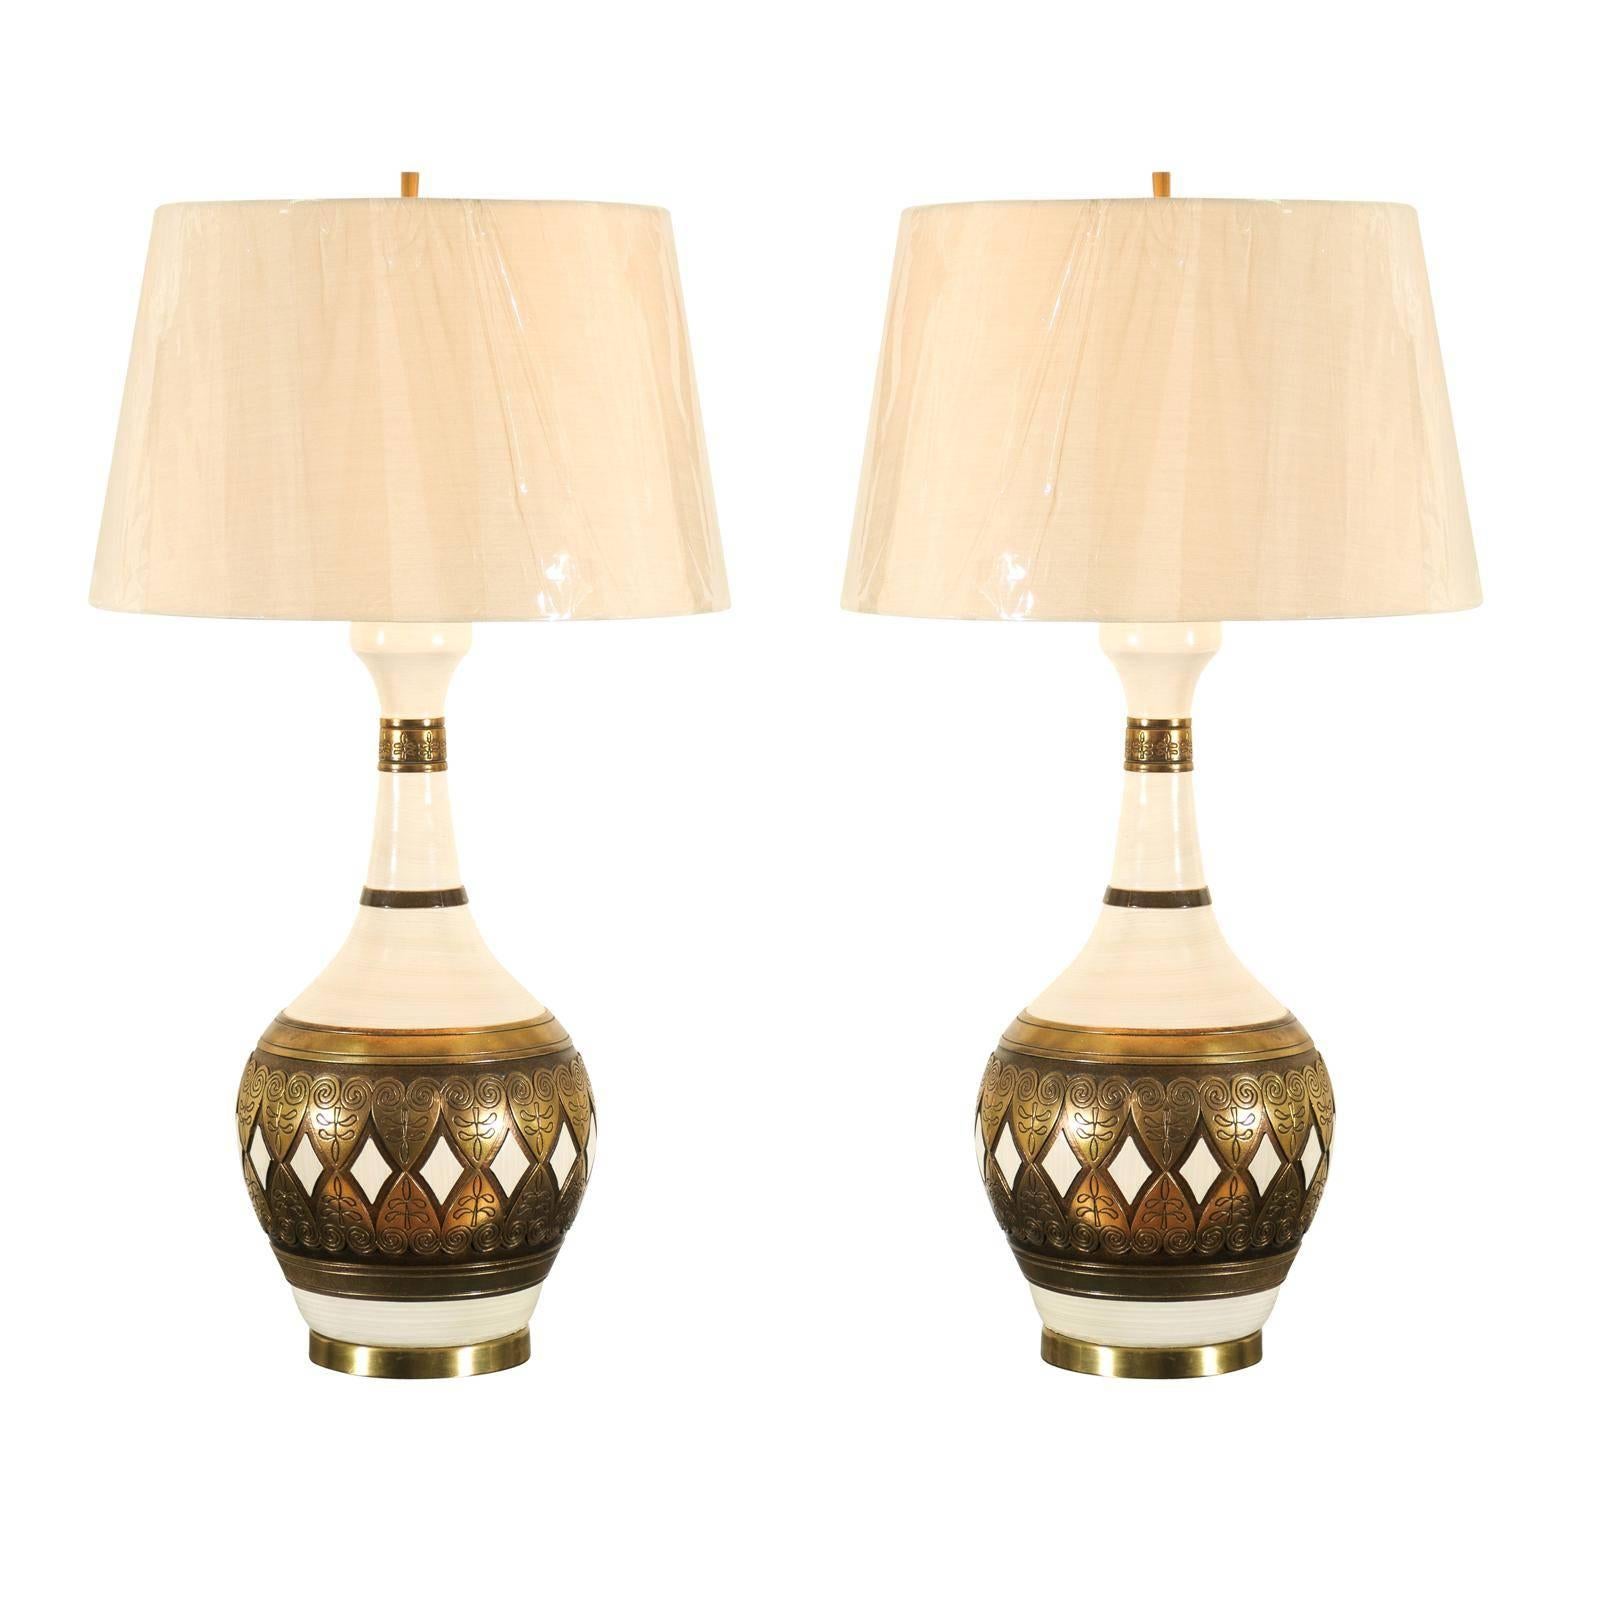 Dazzling Restored Pair of Vintage Lamps by Fortune Lamp Company